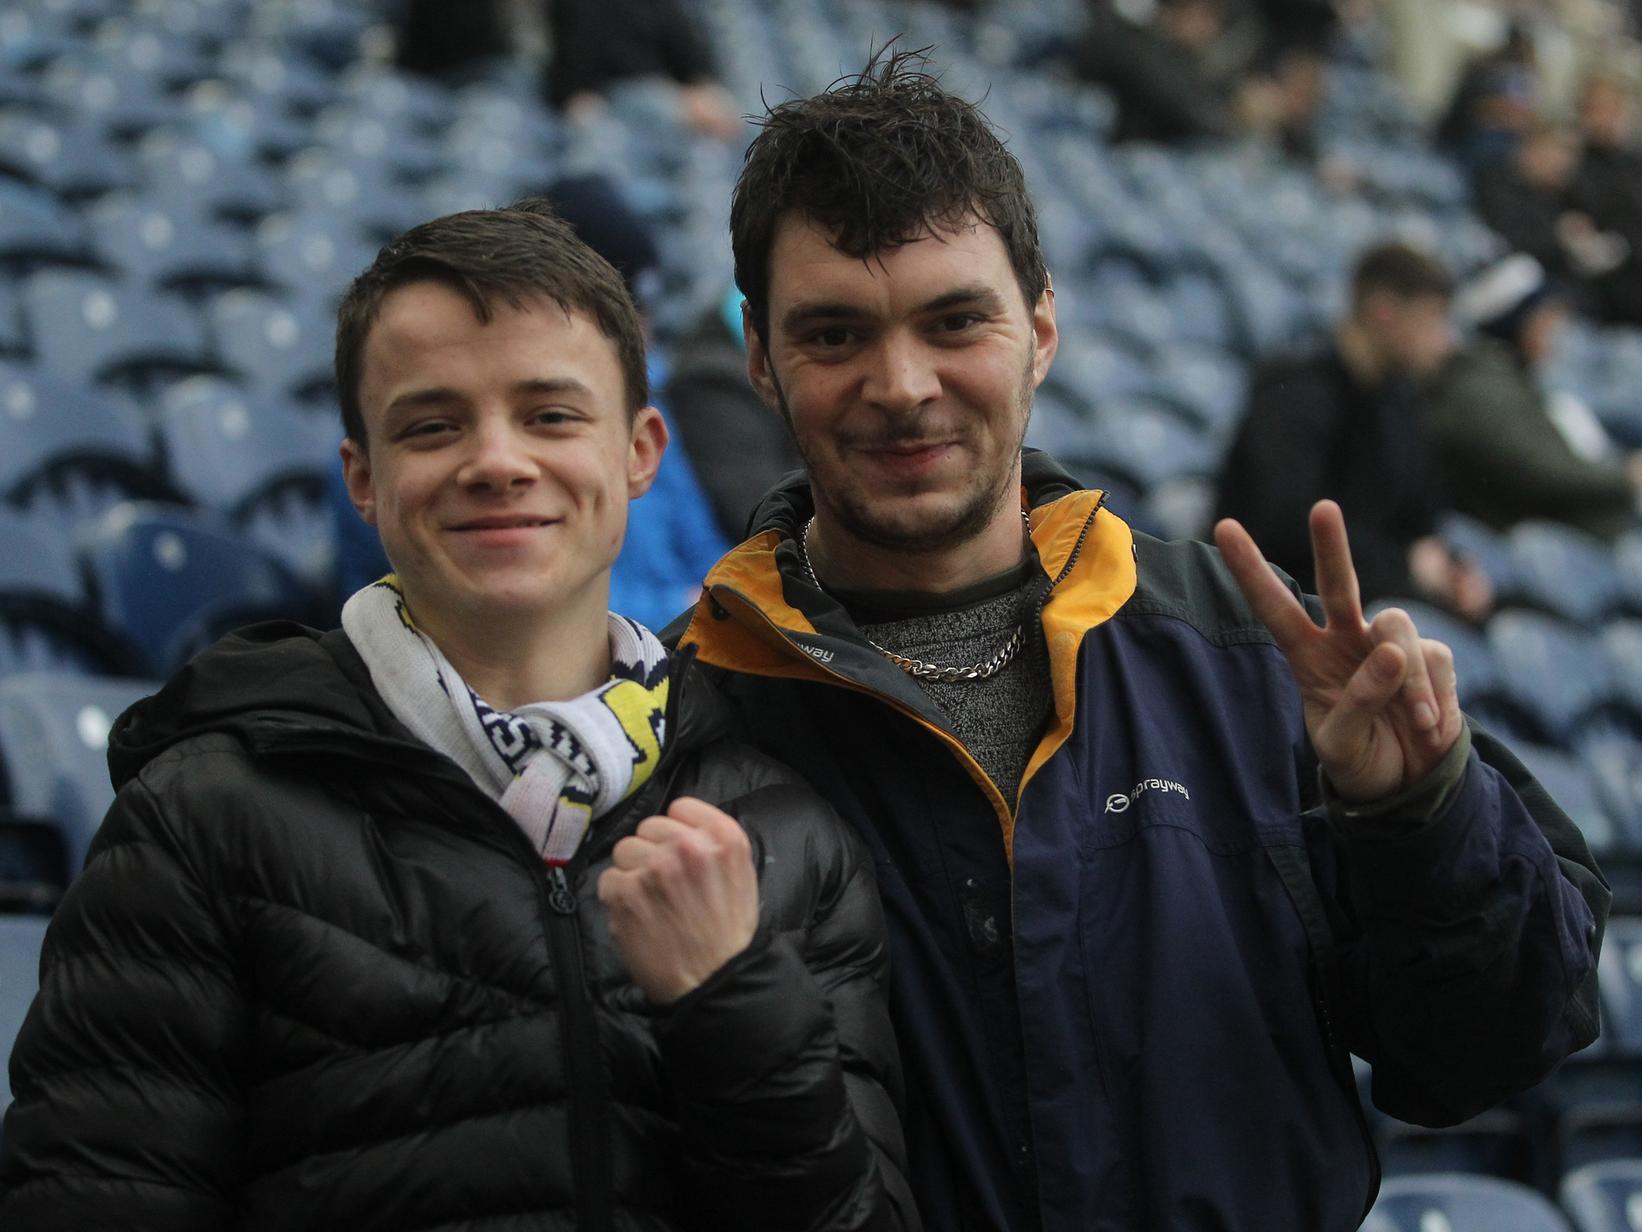 Two Preston fans give our cameraman a smile and a bit of a pose